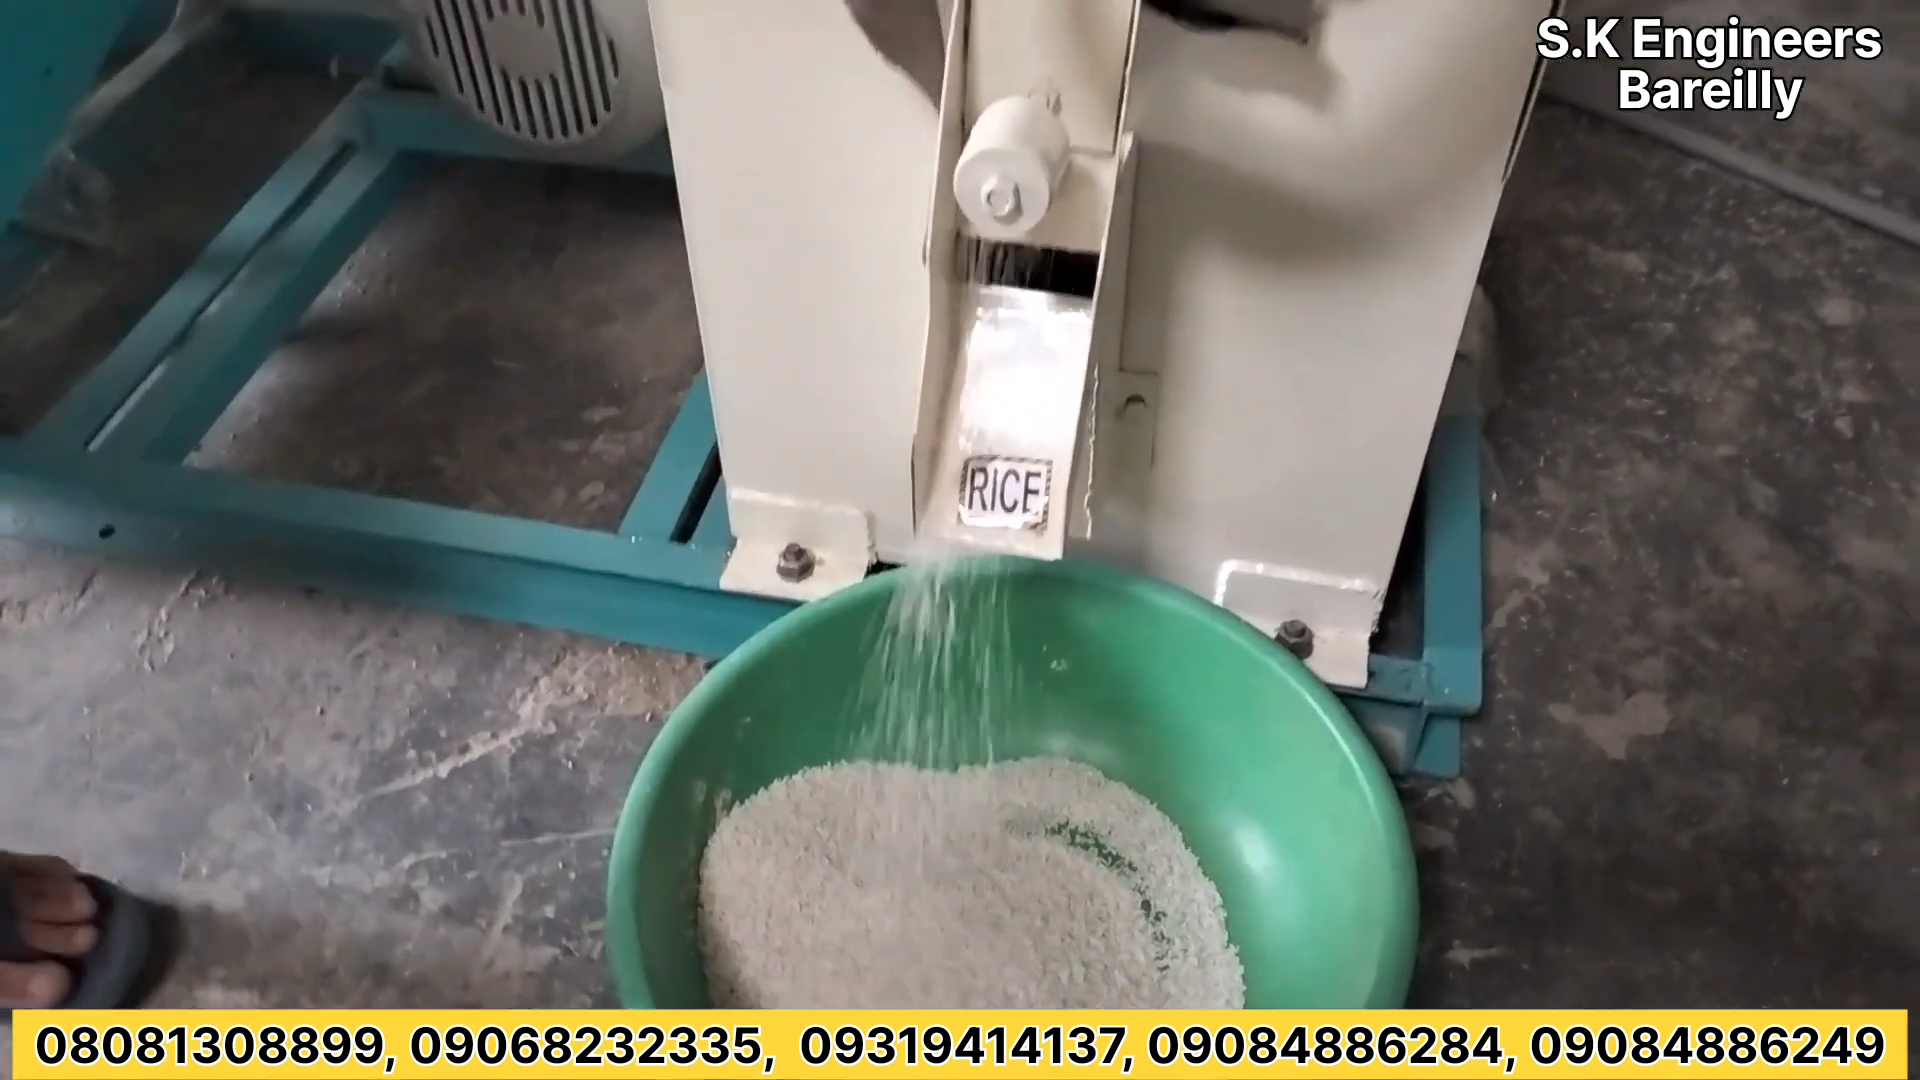 2 in 1 Flour and rice pulverizer